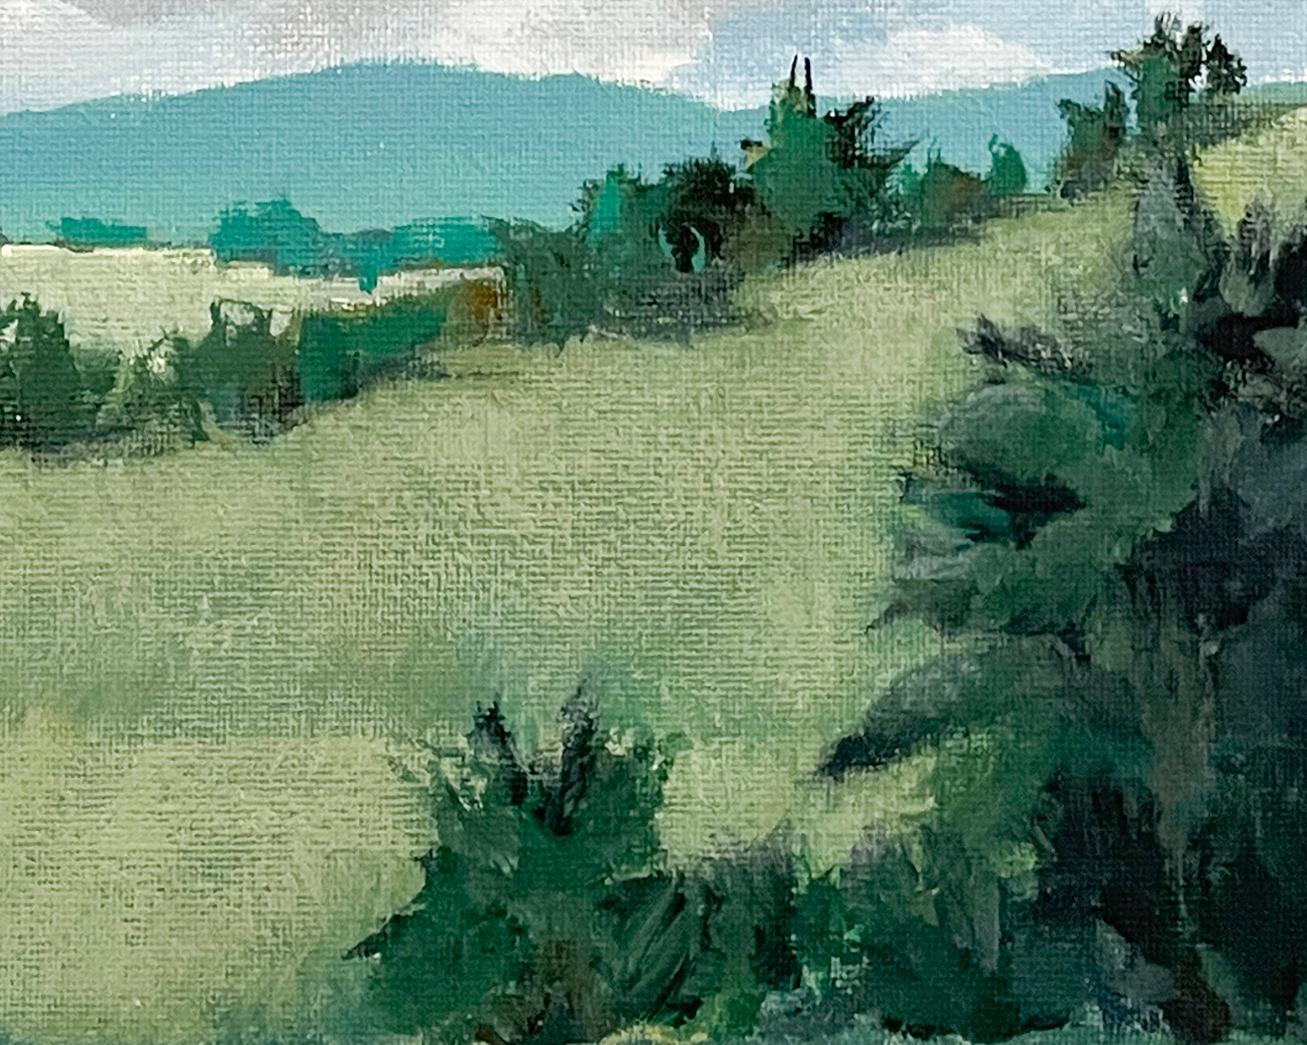 Catskills from Claverack (Plein Air Hudson Valley Landscape Painting, Framed) For Sale 3